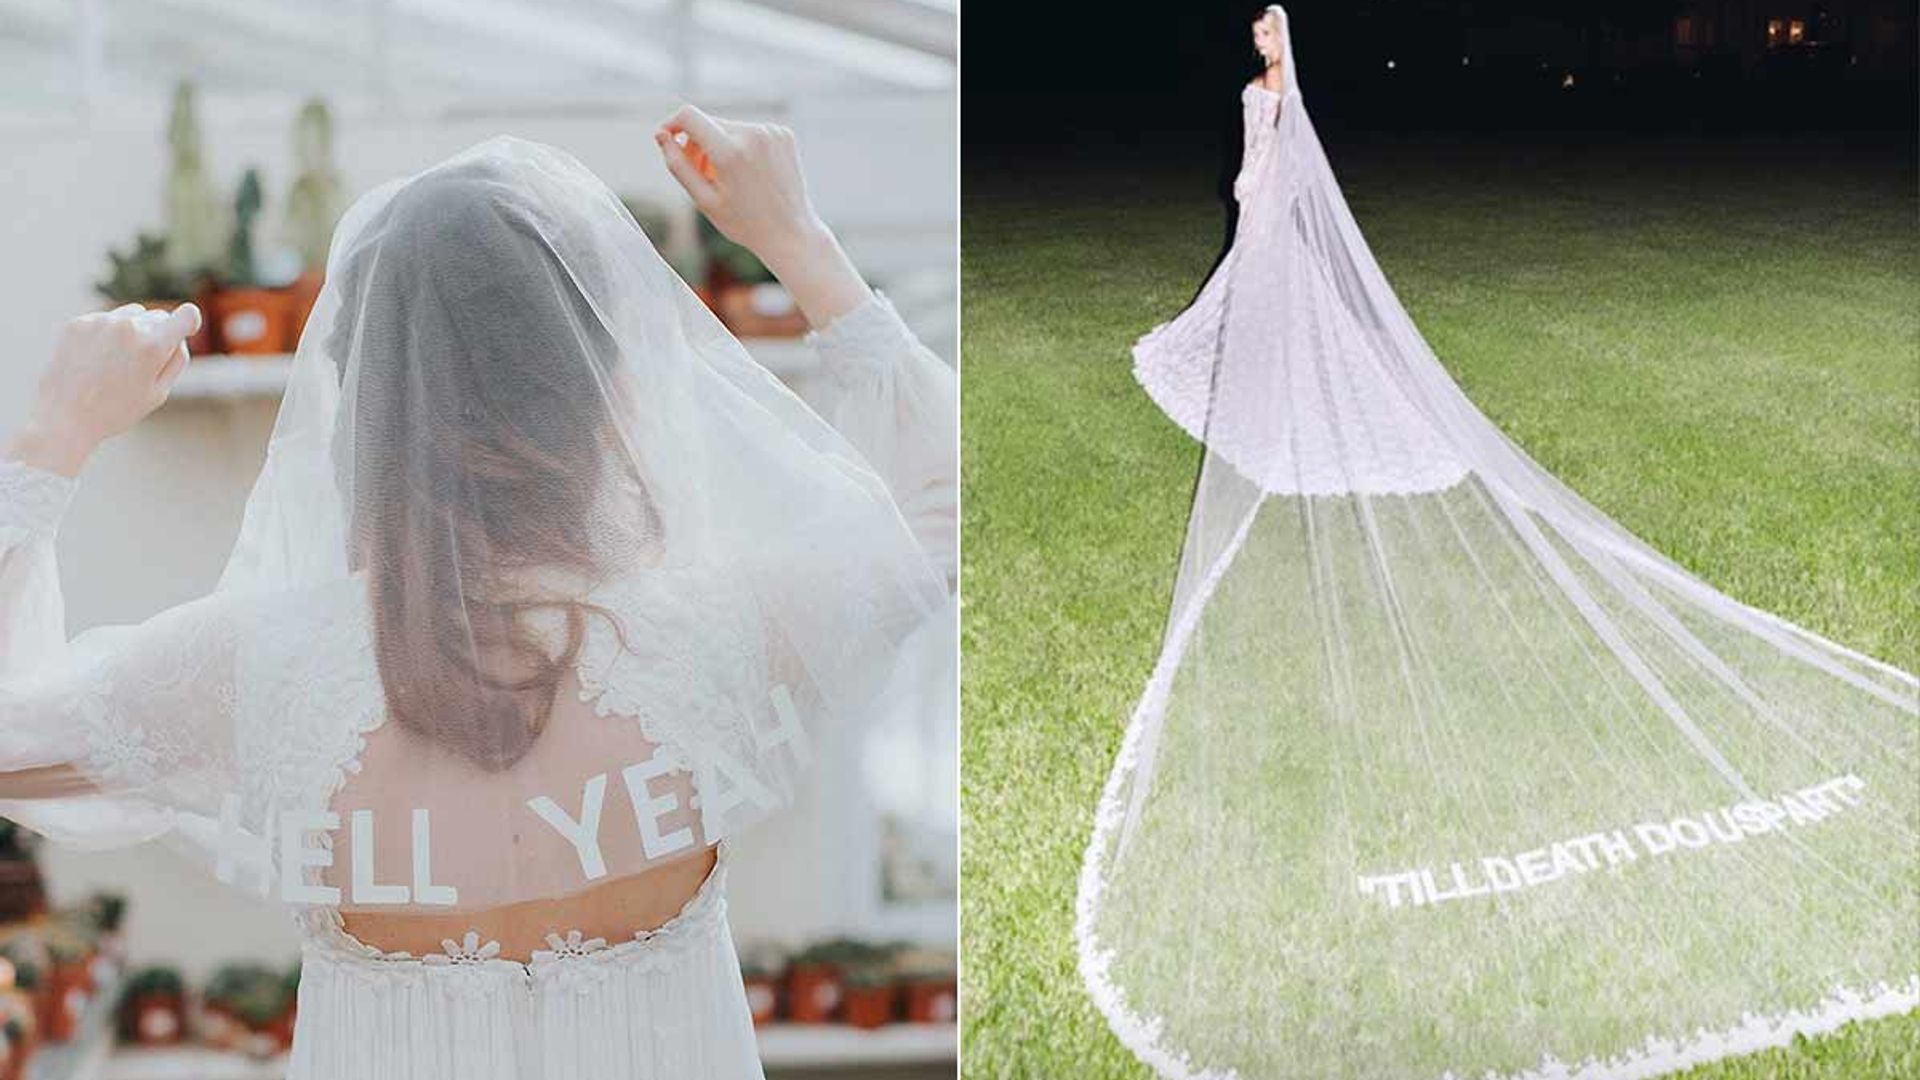 How to rock the statement wedding veil trend like Hailey Bieber